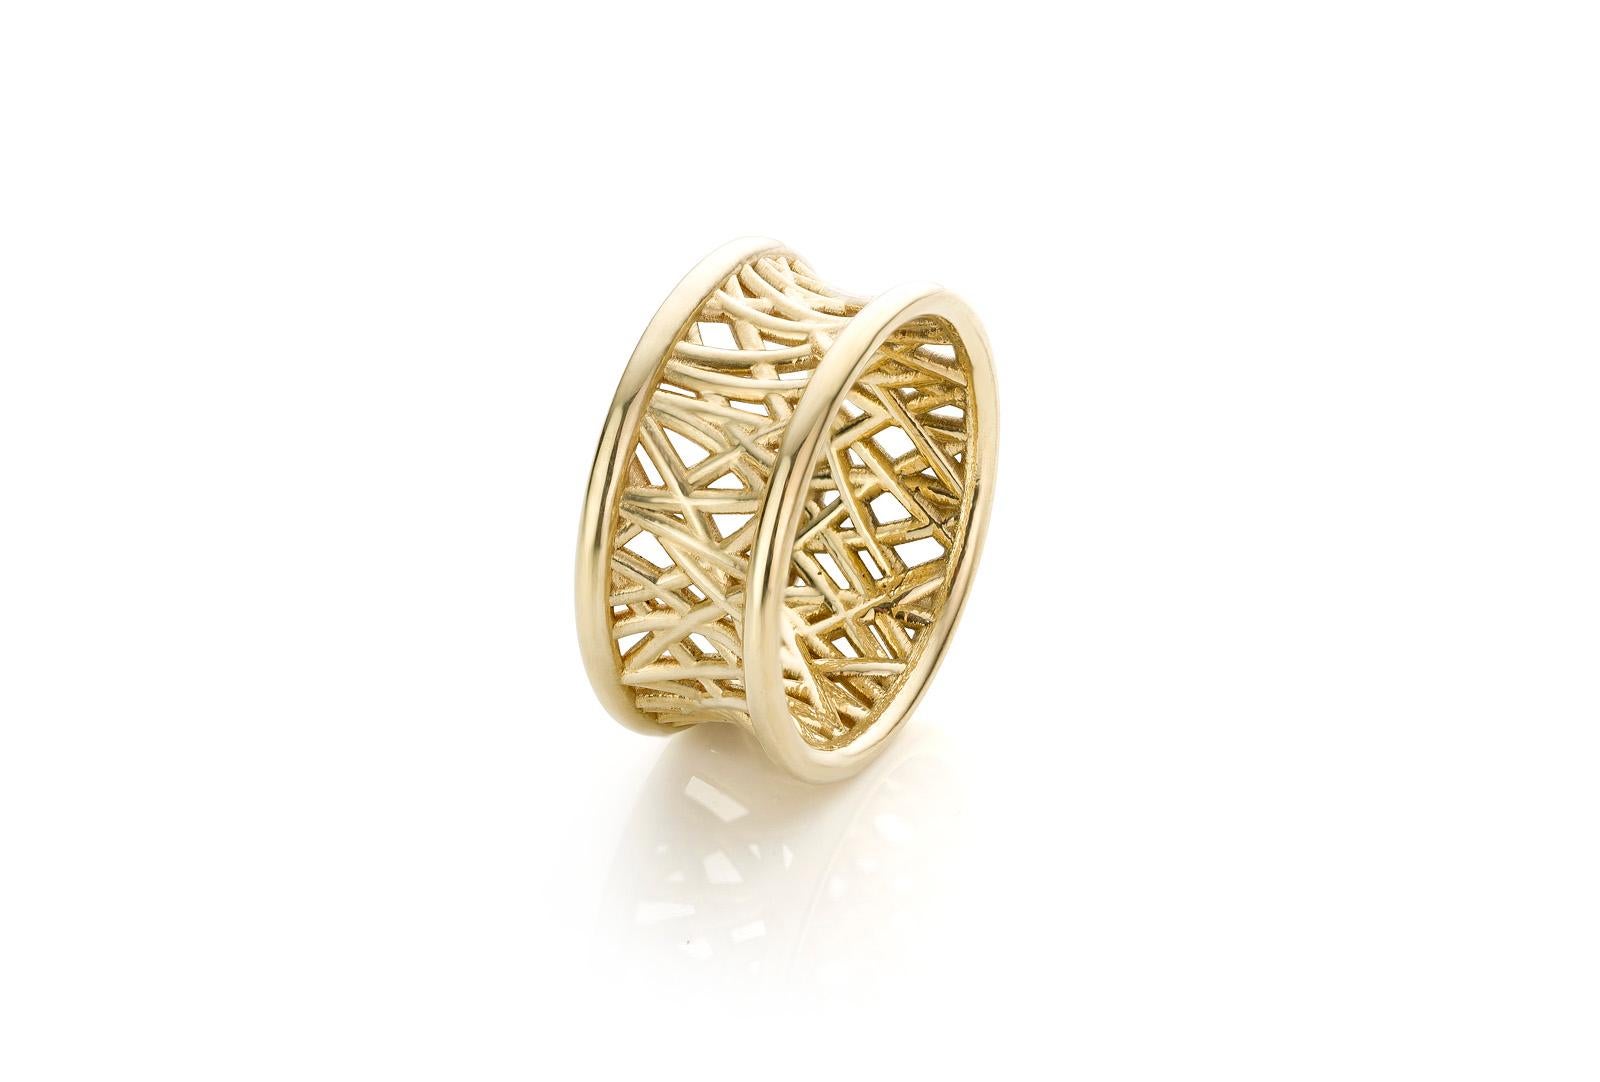 Contemporary Cober 14 carat Yellow Gold Handmade fantasy Ring Totally Handmade Available Now For Sale